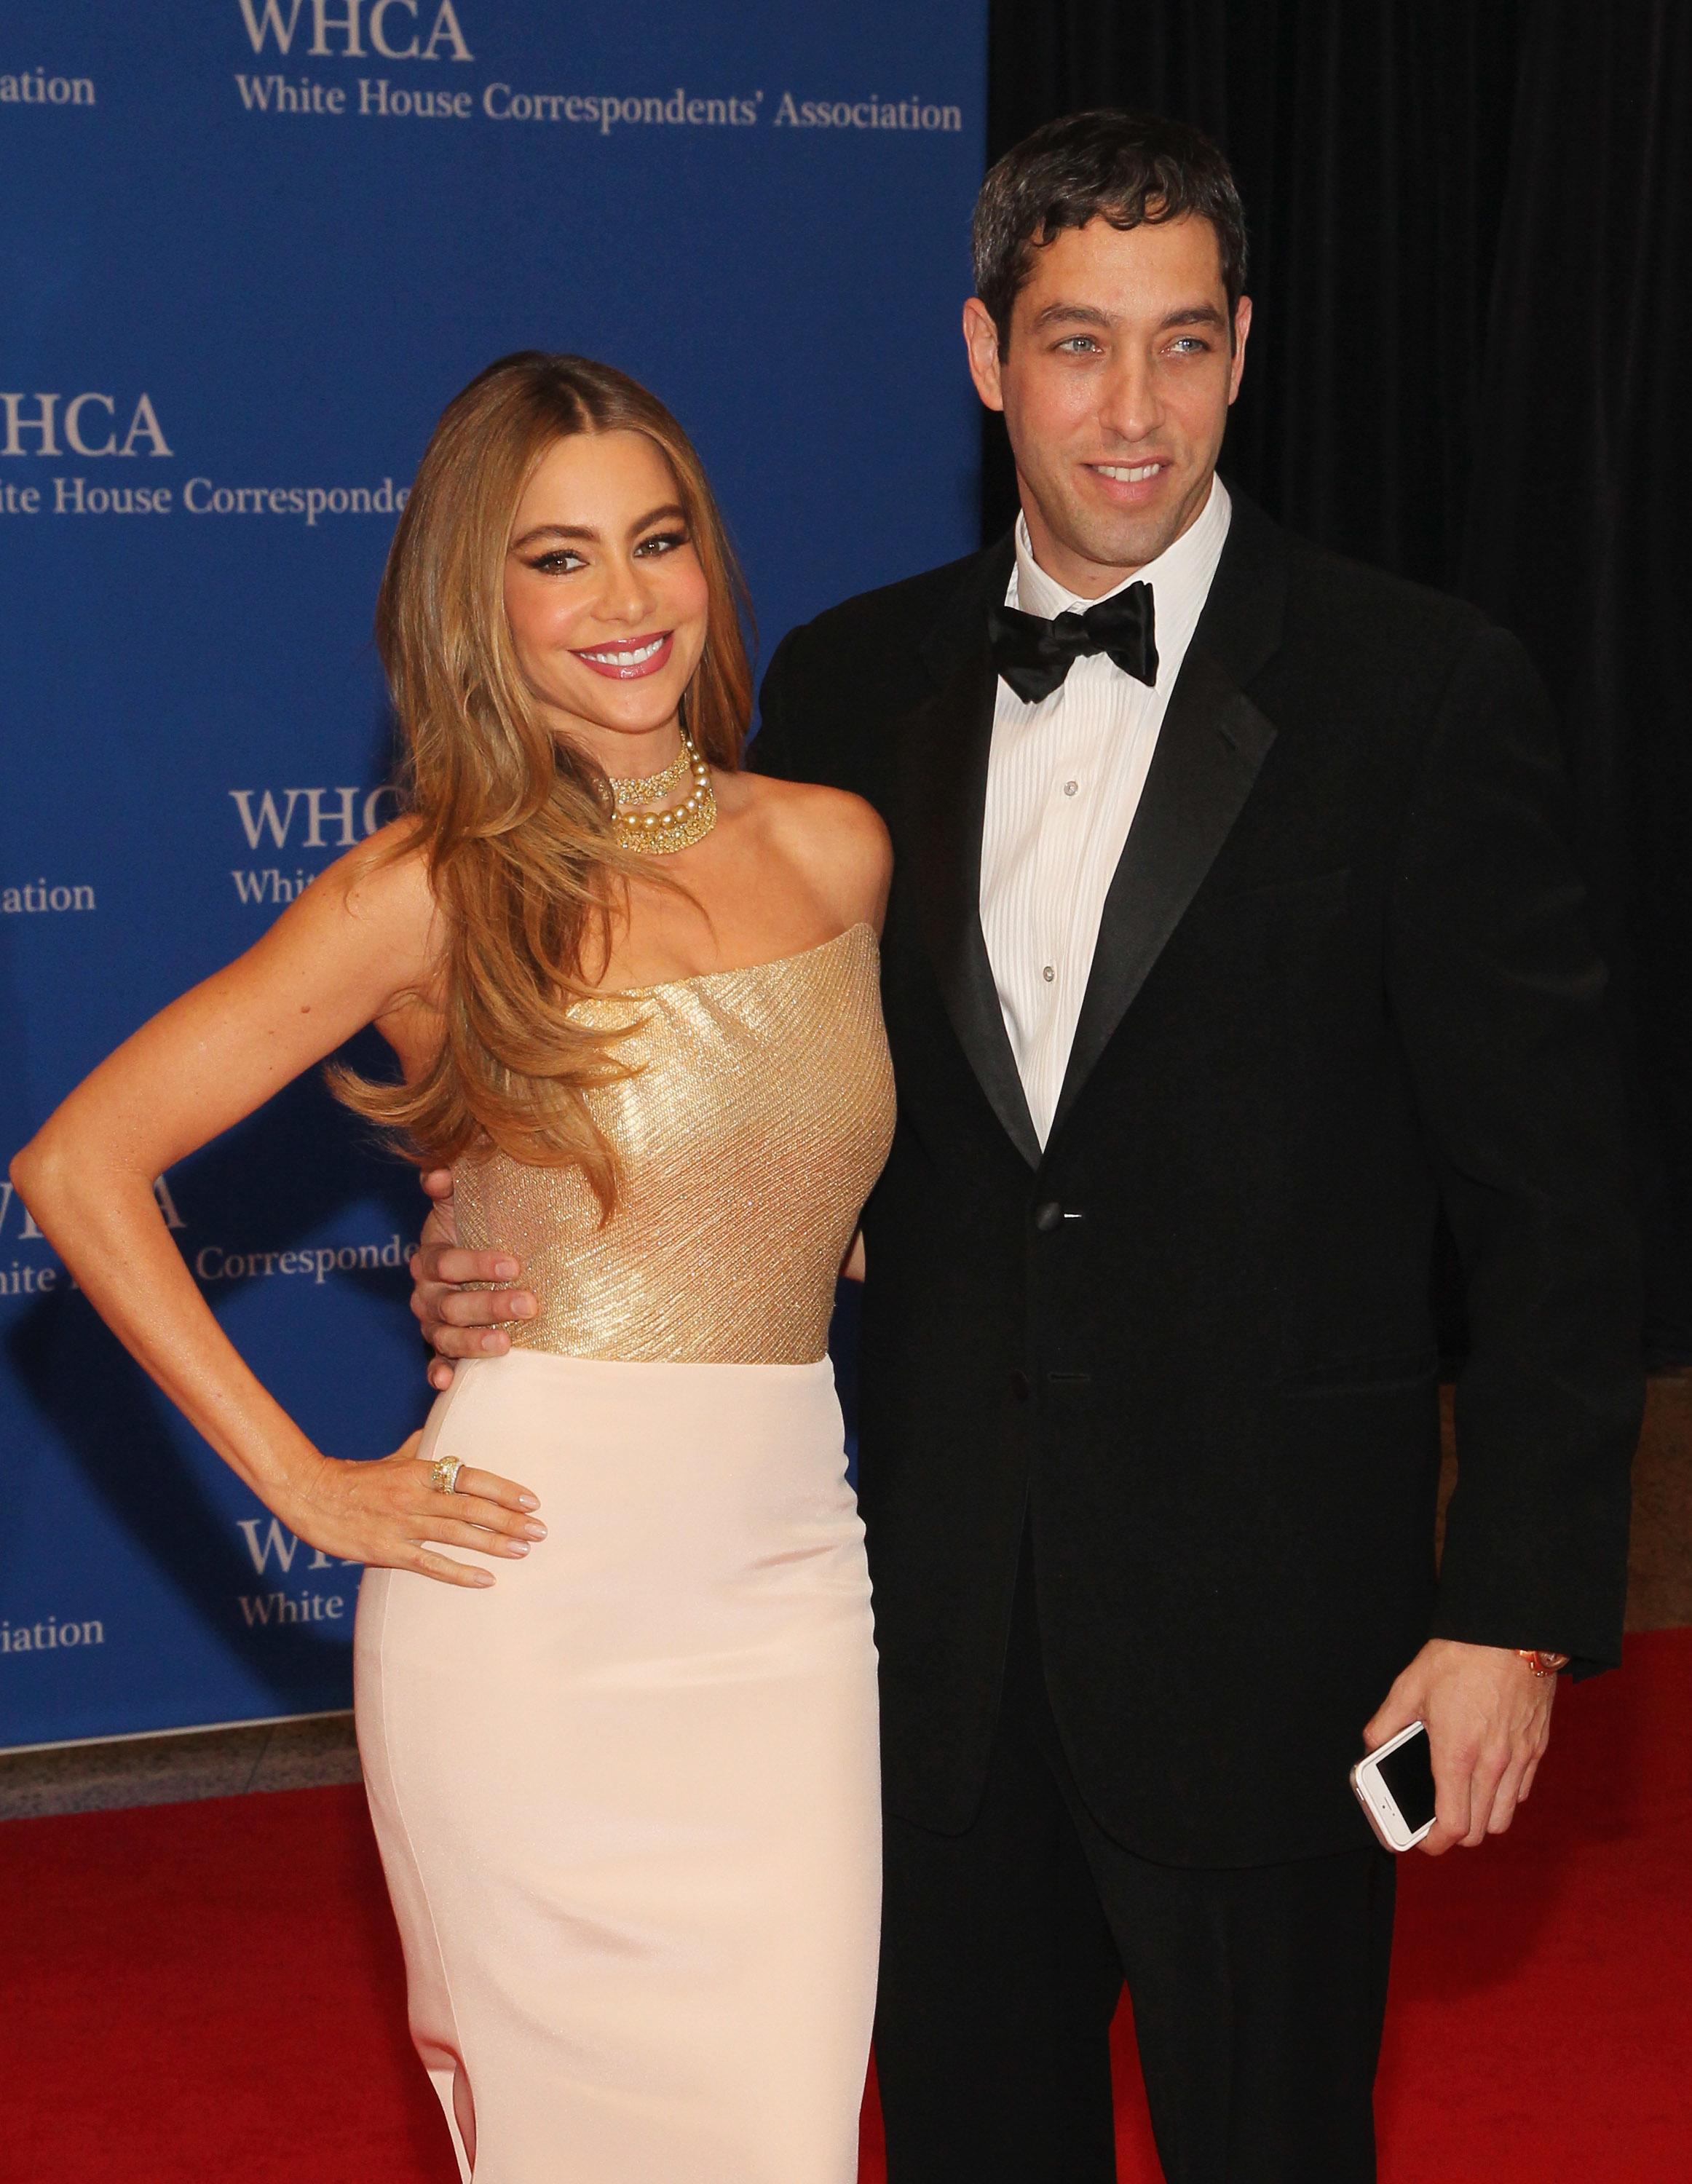 nick and sofia on the red carpet